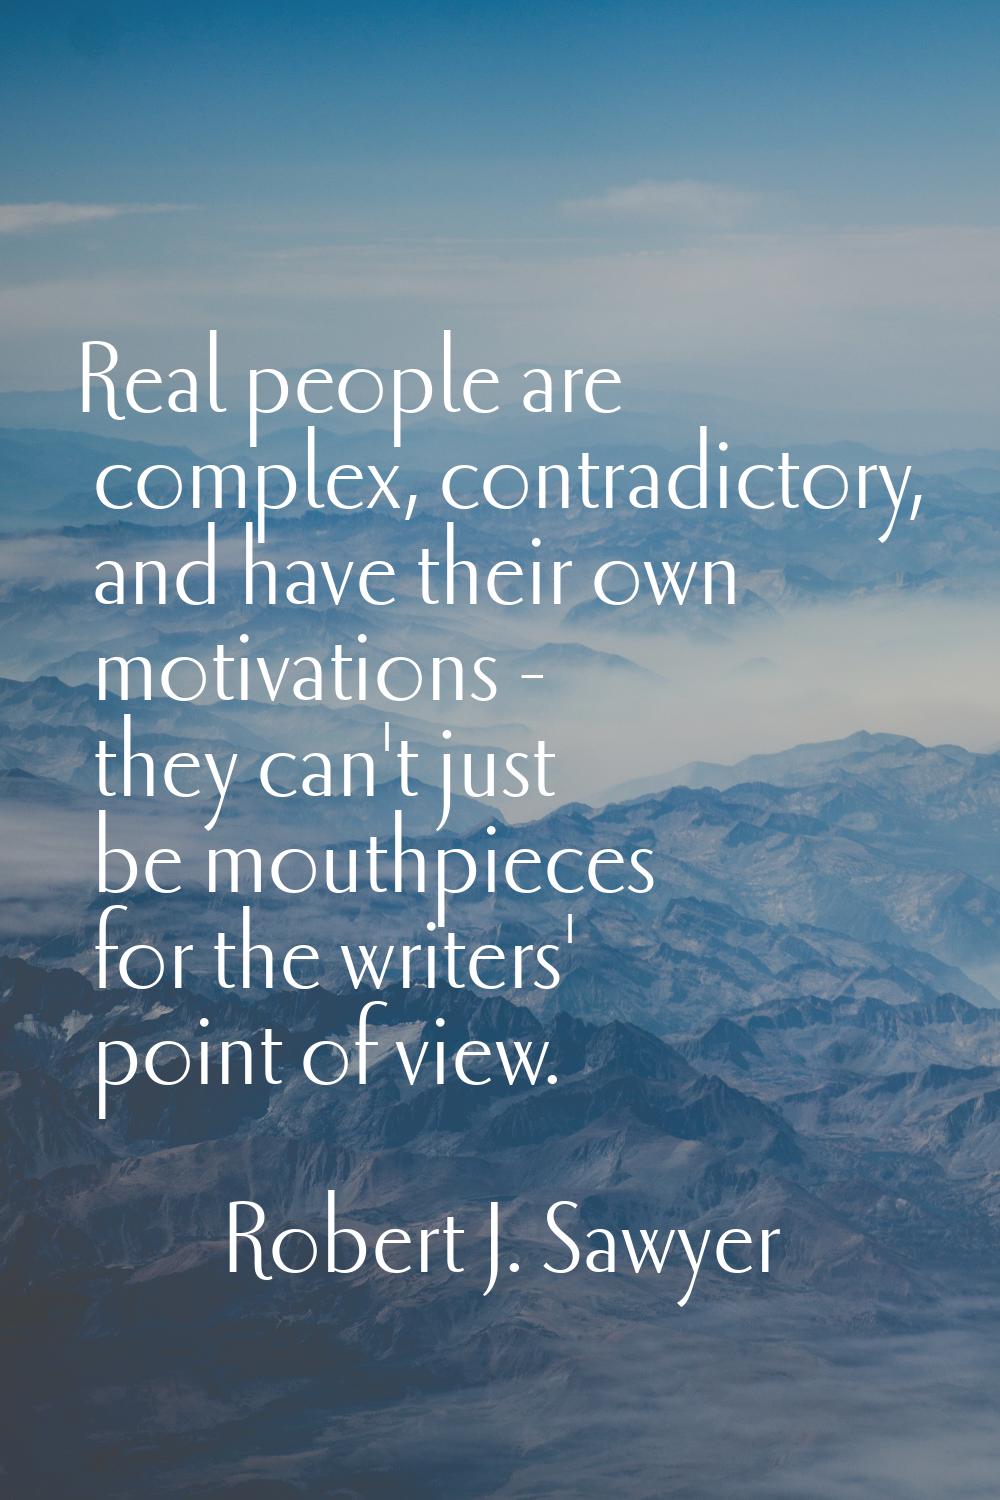 Real people are complex, contradictory, and have their own motivations - they can't just be mouthpi